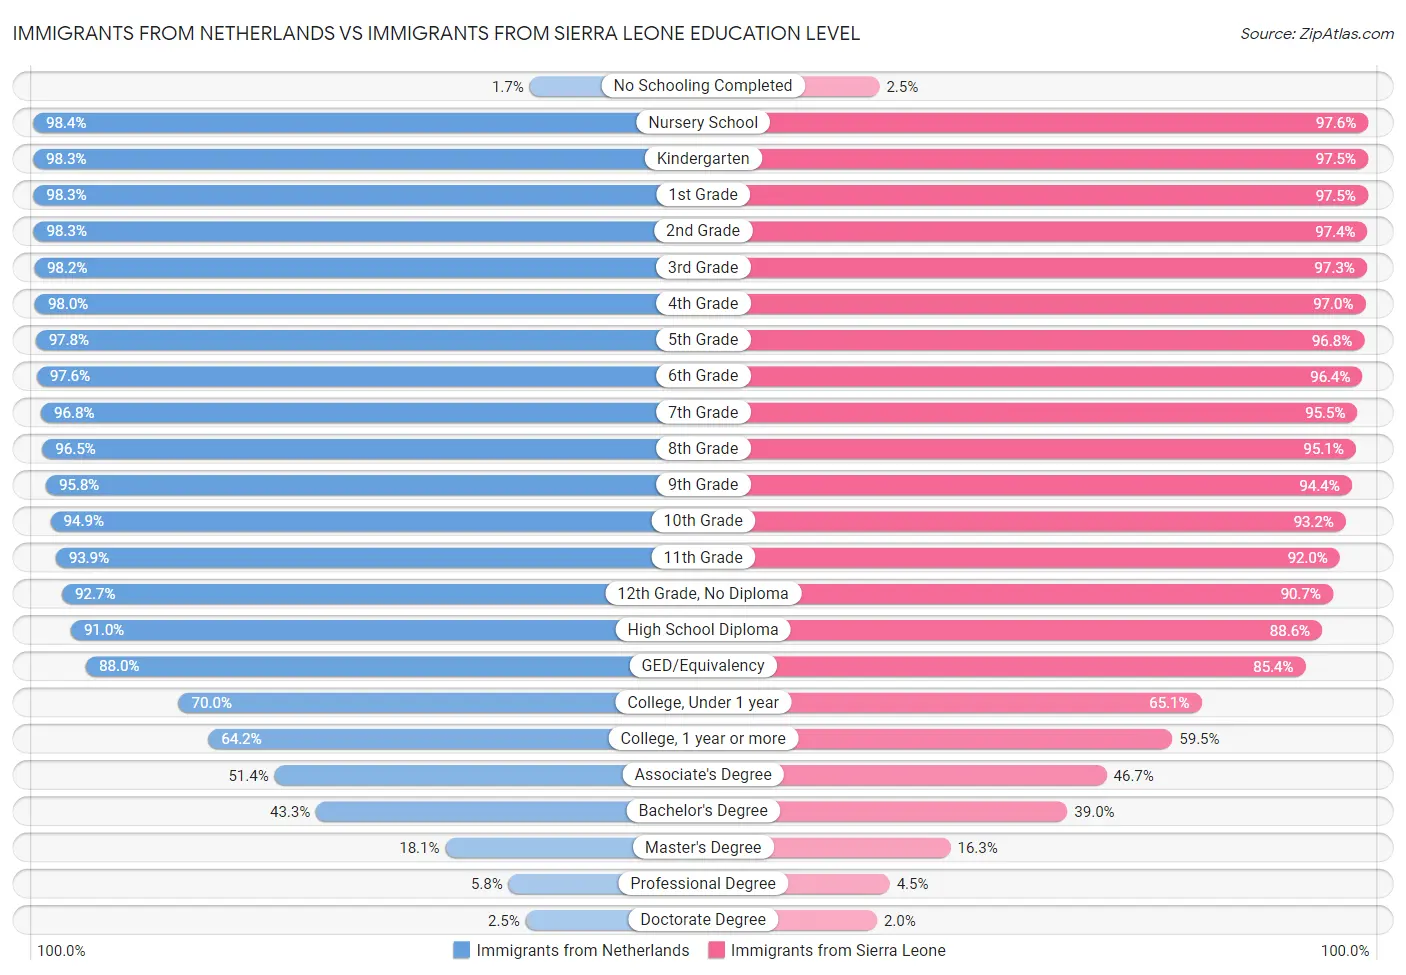 Immigrants from Netherlands vs Immigrants from Sierra Leone Education Level